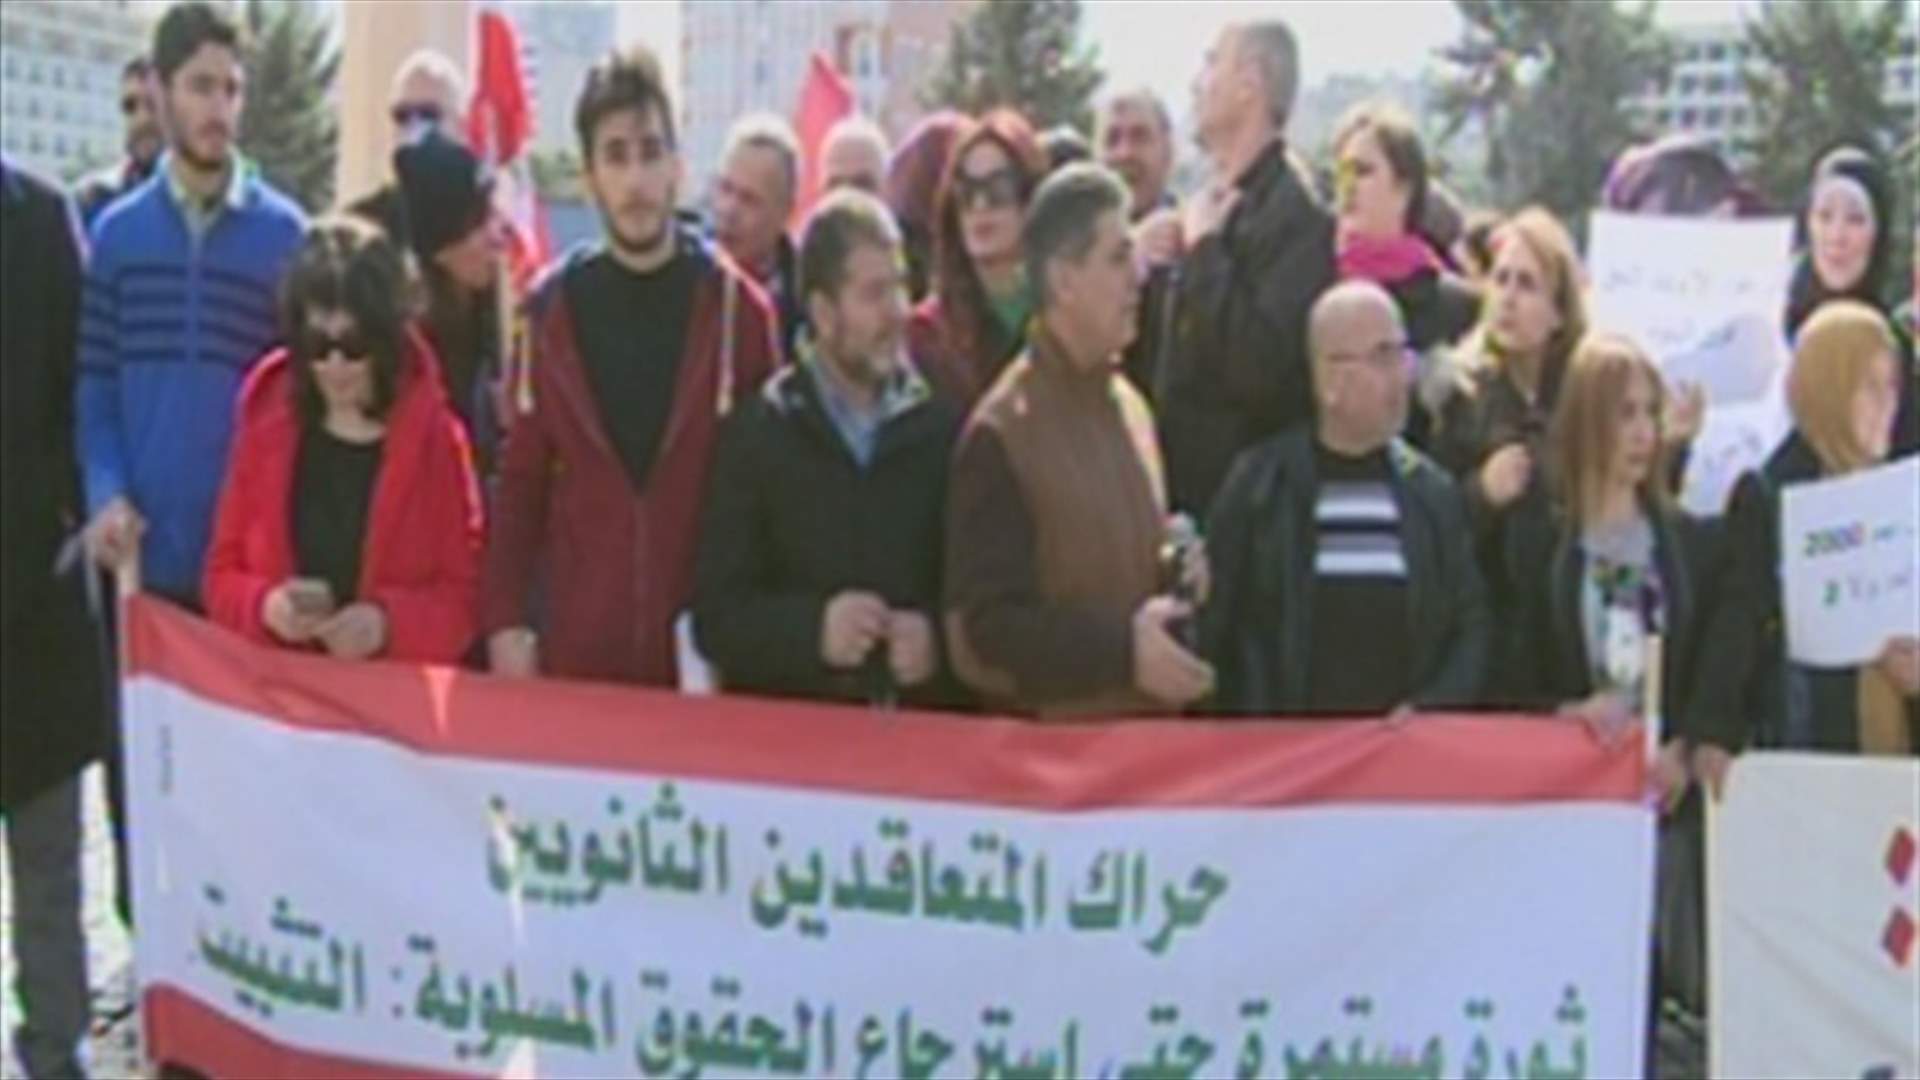 Public sector secondary teachers stage sit-in at Riad al-Solh square